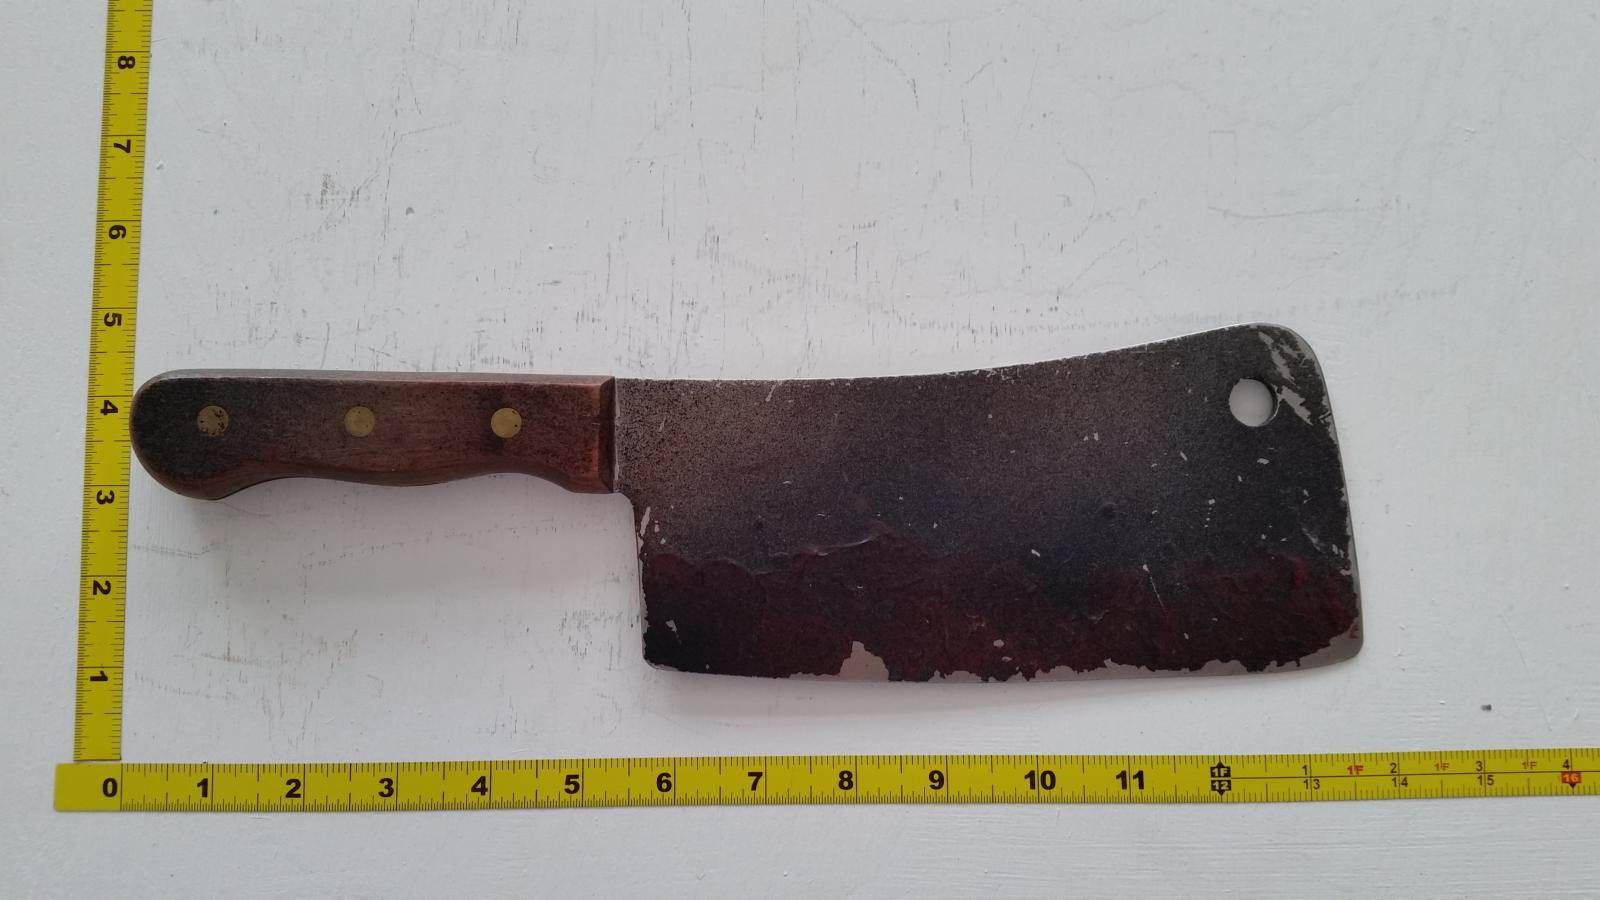 Old Beaten Up Heavy Kitchen Cleaver - NOT approved for blade-to-blade stage combat.